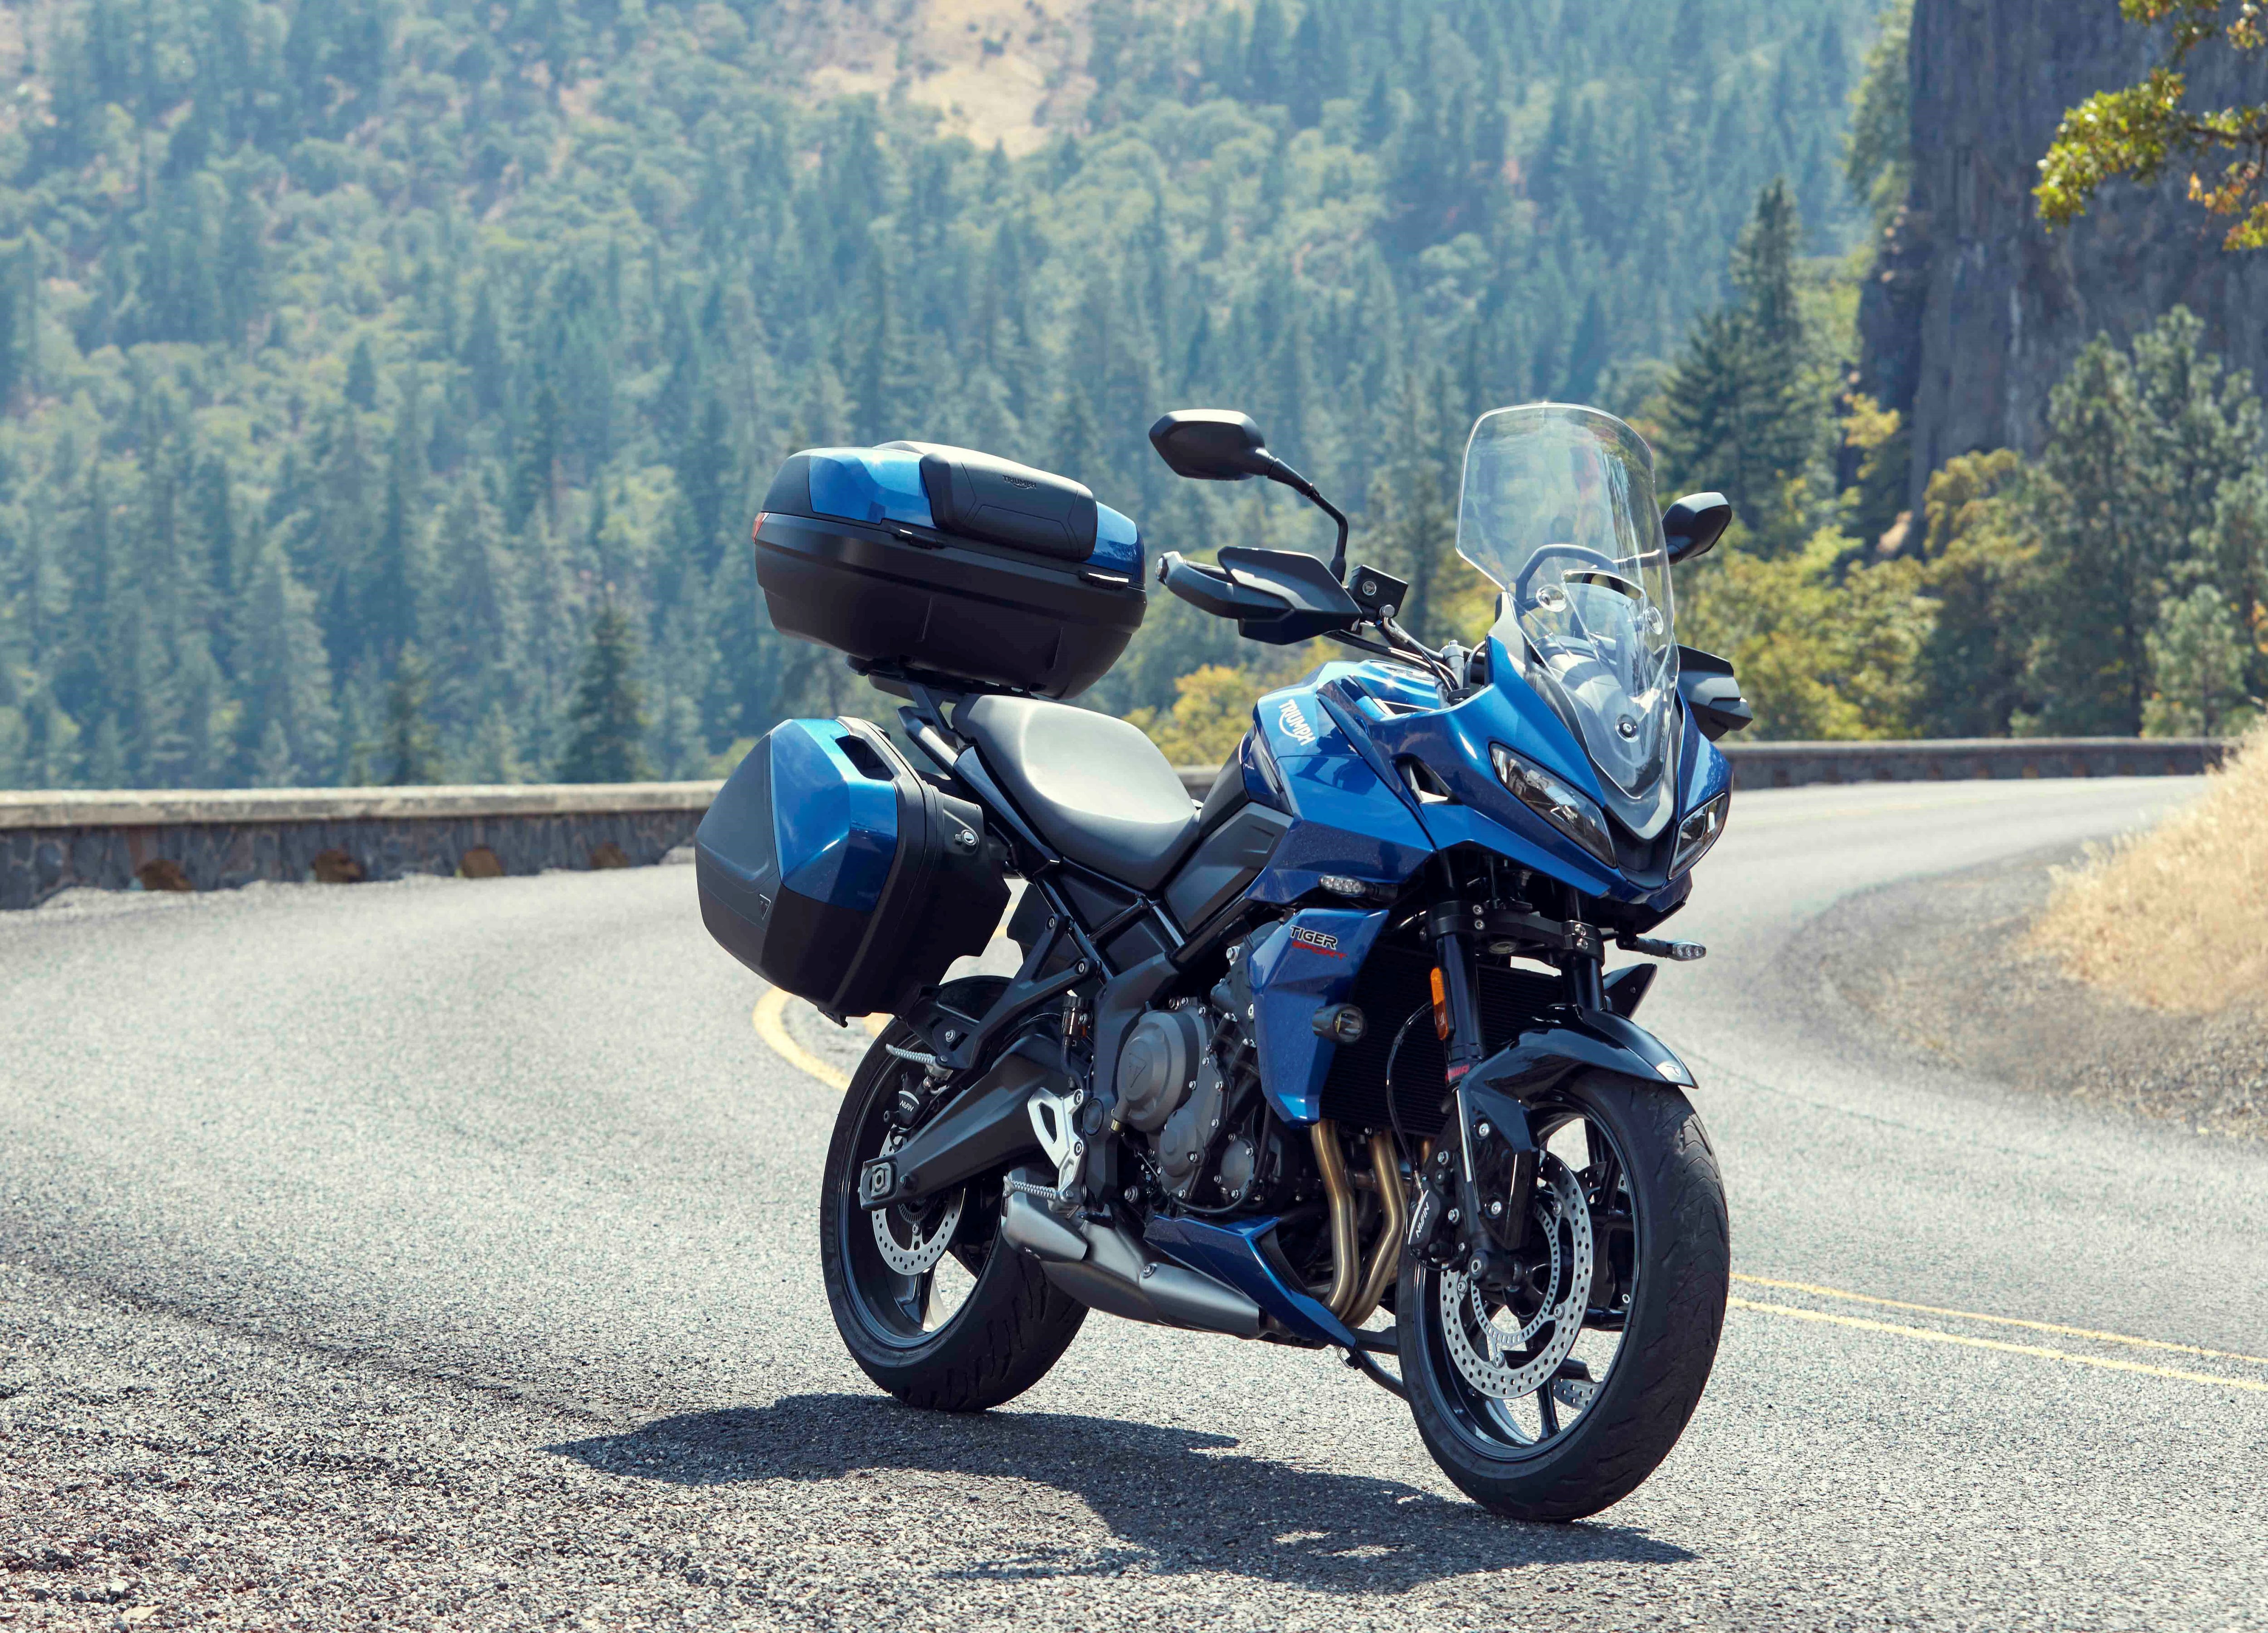 Triumph has developed a new luggage system to work with the integrated mounting points on the Tiger Sport 660. The side cases and 47-liter top box can be color-matched to the bike (Lucerne Blue shown here).